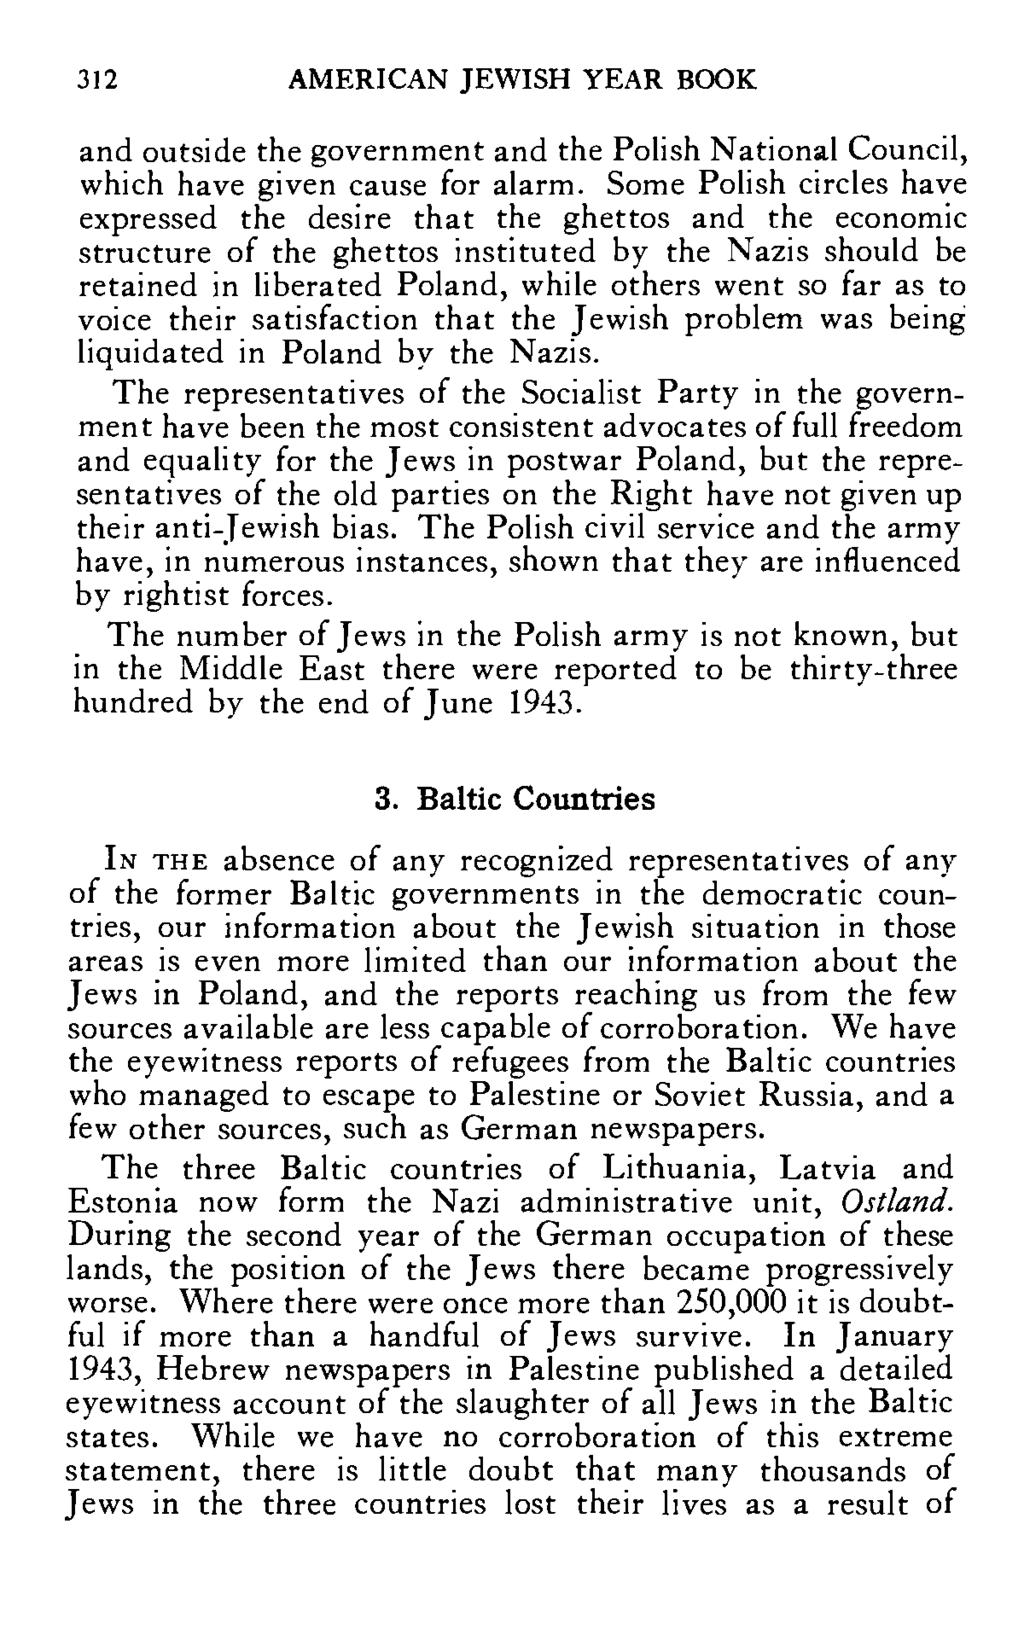 312 AMERICAN JEWISH YEAR BOOK and outside the government and the Polish National Council, which have given cause for alarm.